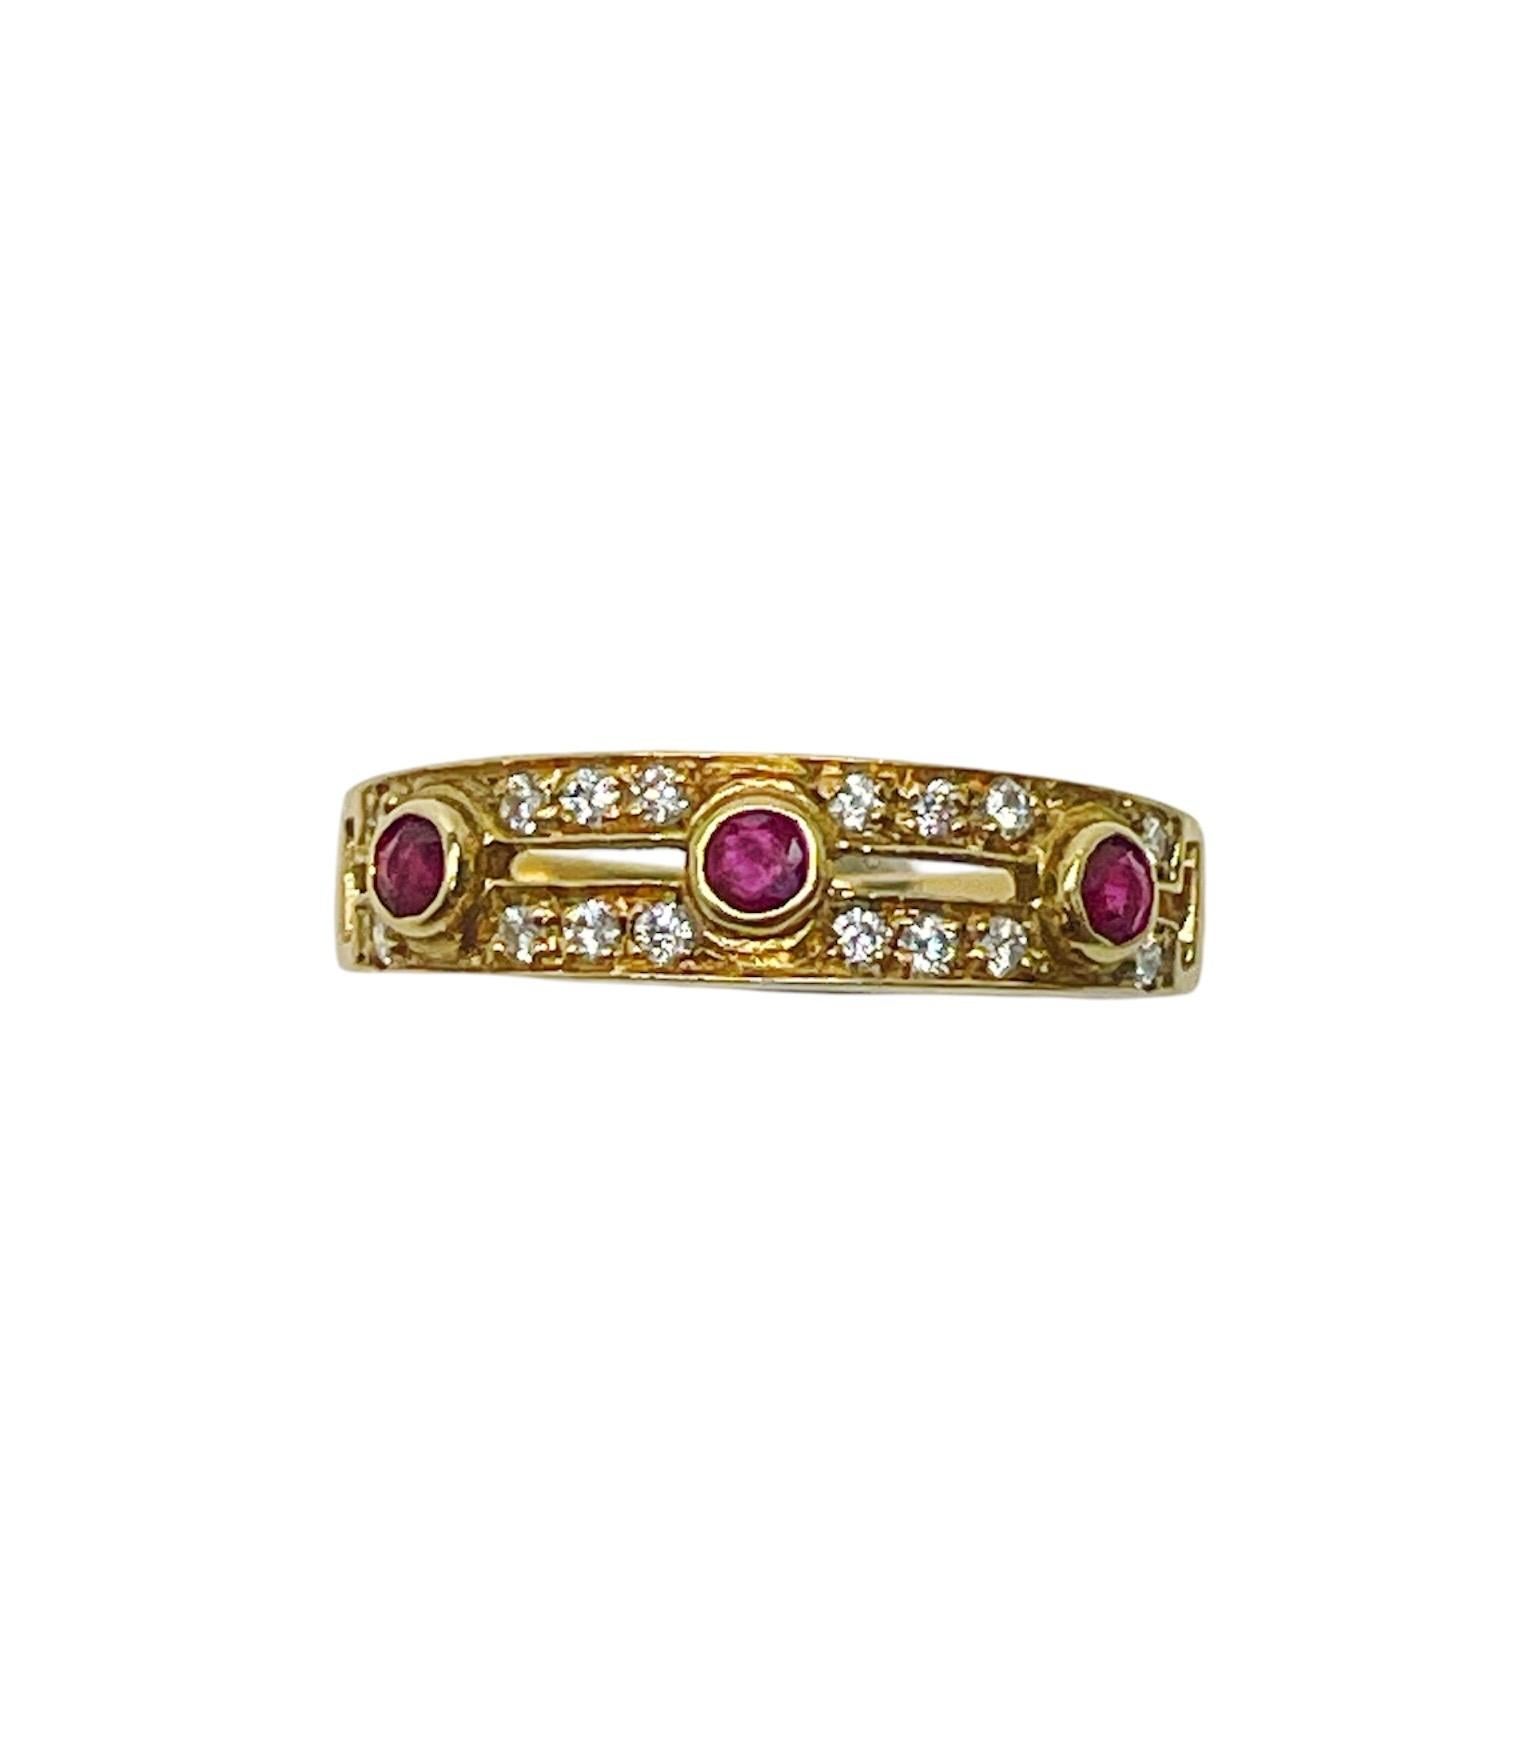 This classic Cartier ring contains three round mixed cut rubies measuring approximately 2.40 mm in diameter surrounded by two rows of round brilliant cut diamonds weighing approximately 0.27 carat total.

Stamp: Cartier 18KT 647. 
Ring Size: 6